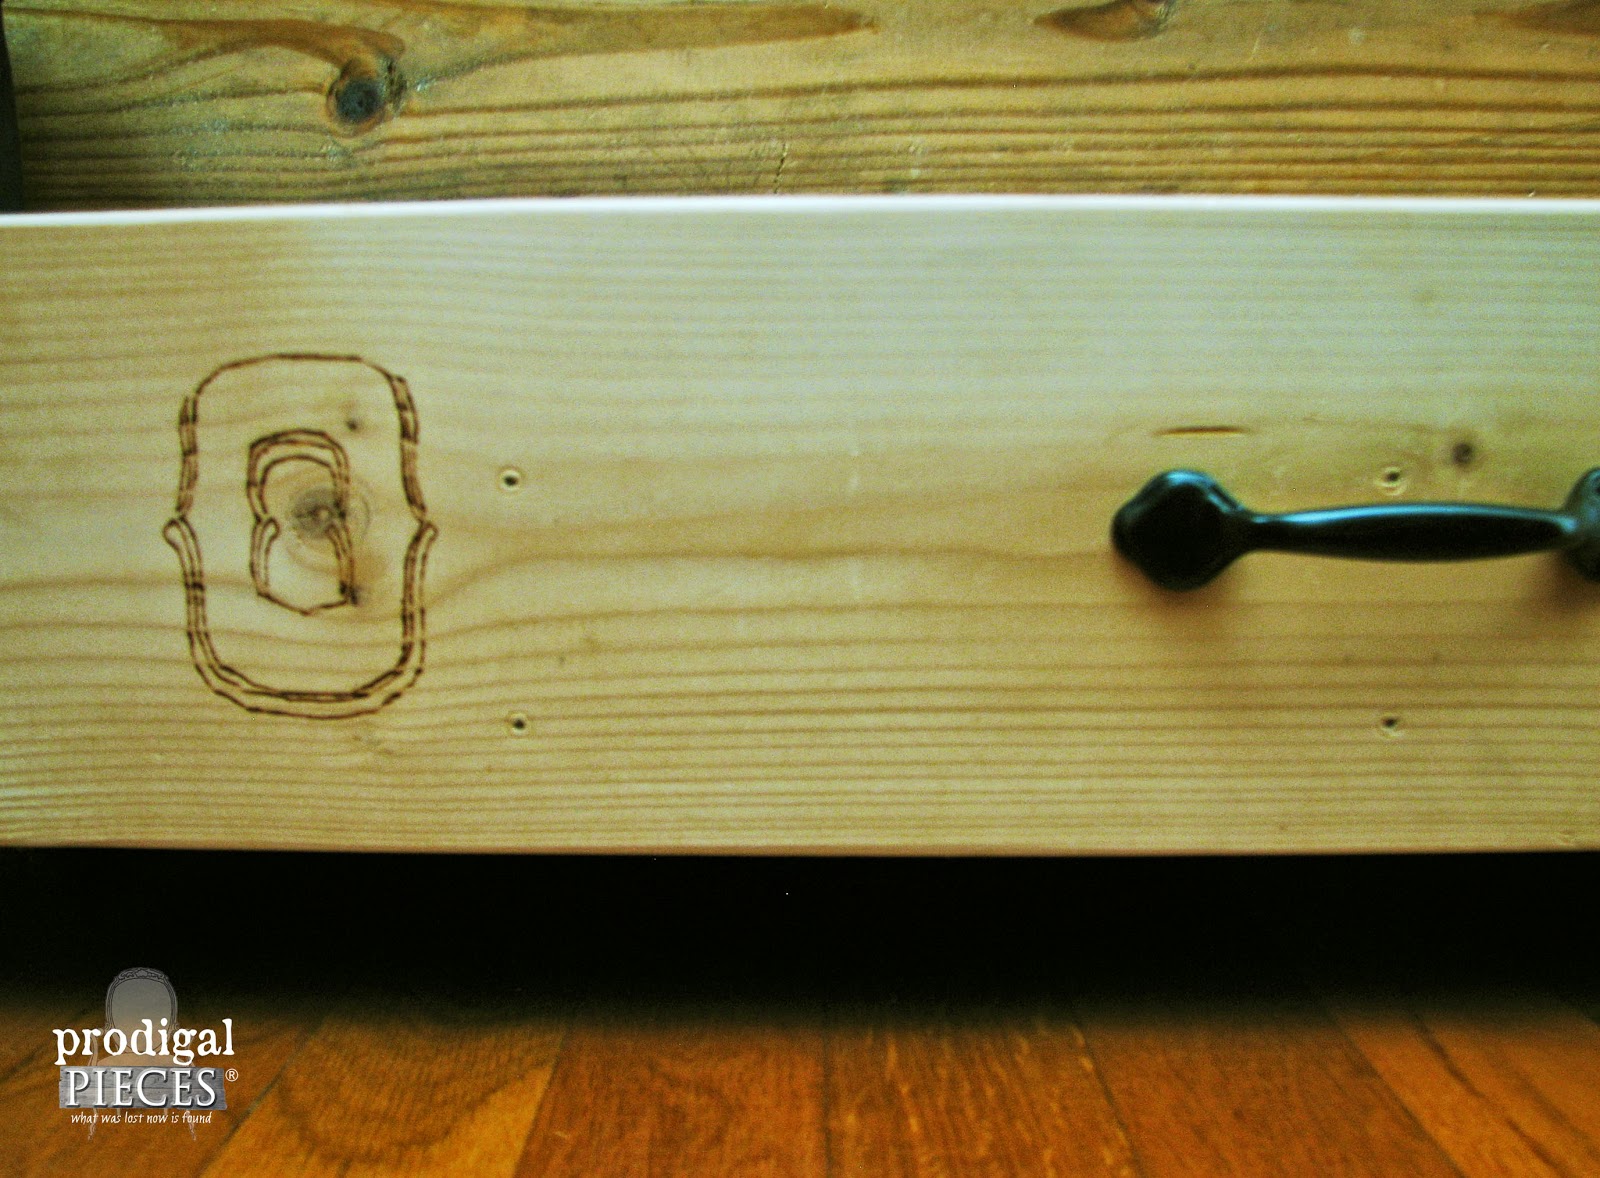 Woodburned Underbed Drawer | prodigalpieces.com